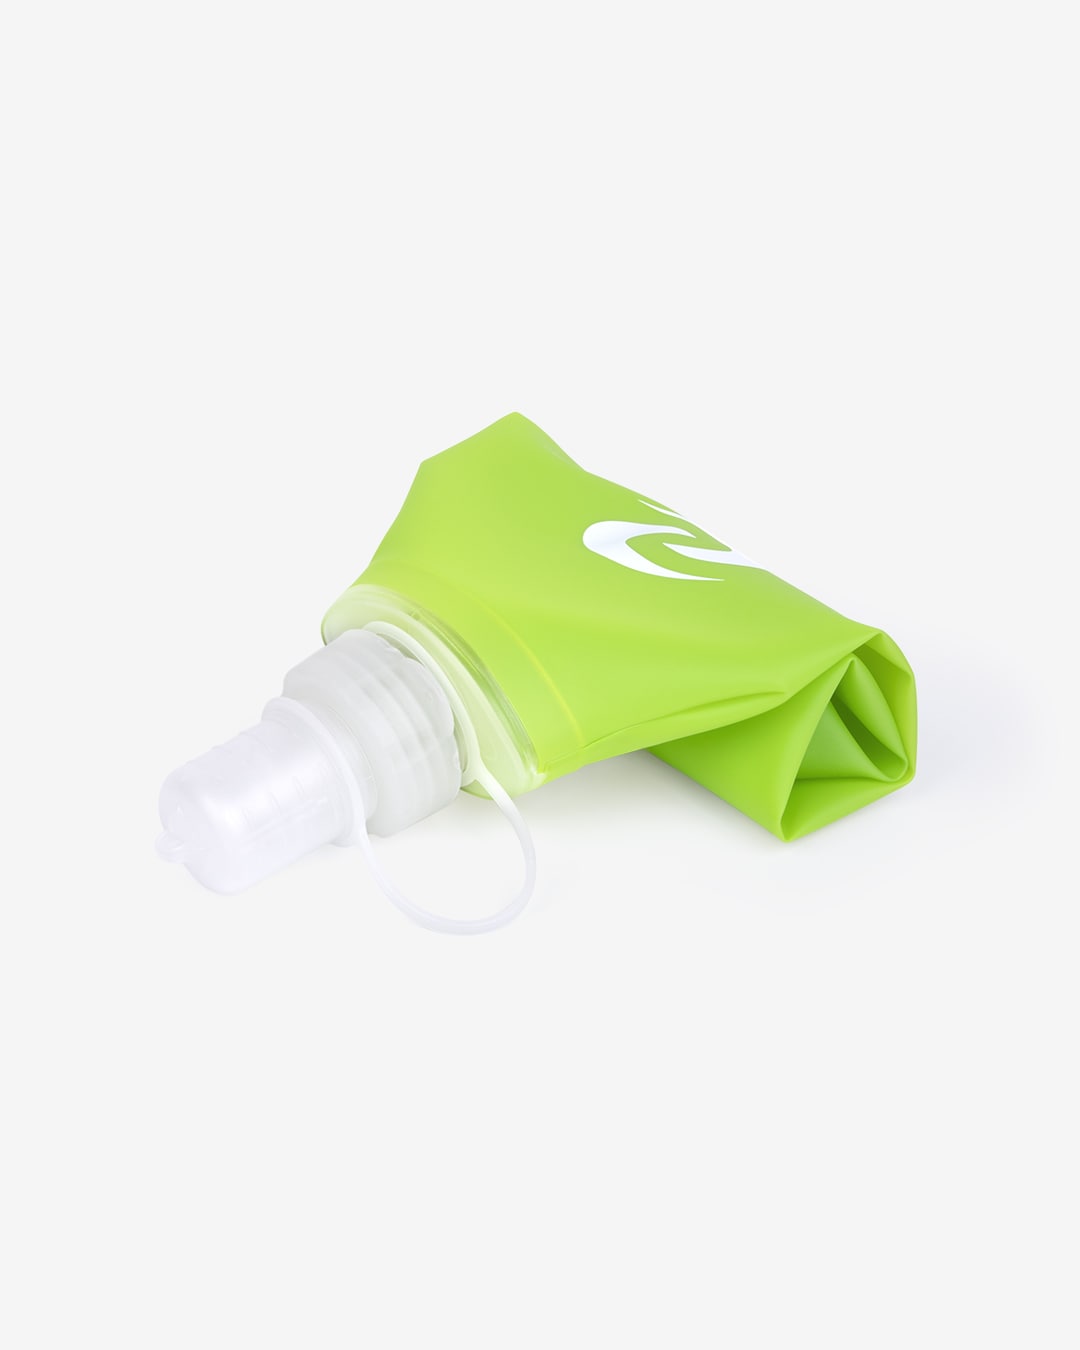 Enertor collapsable water bottle, soft pouch liquid carrier in green - Compressed up